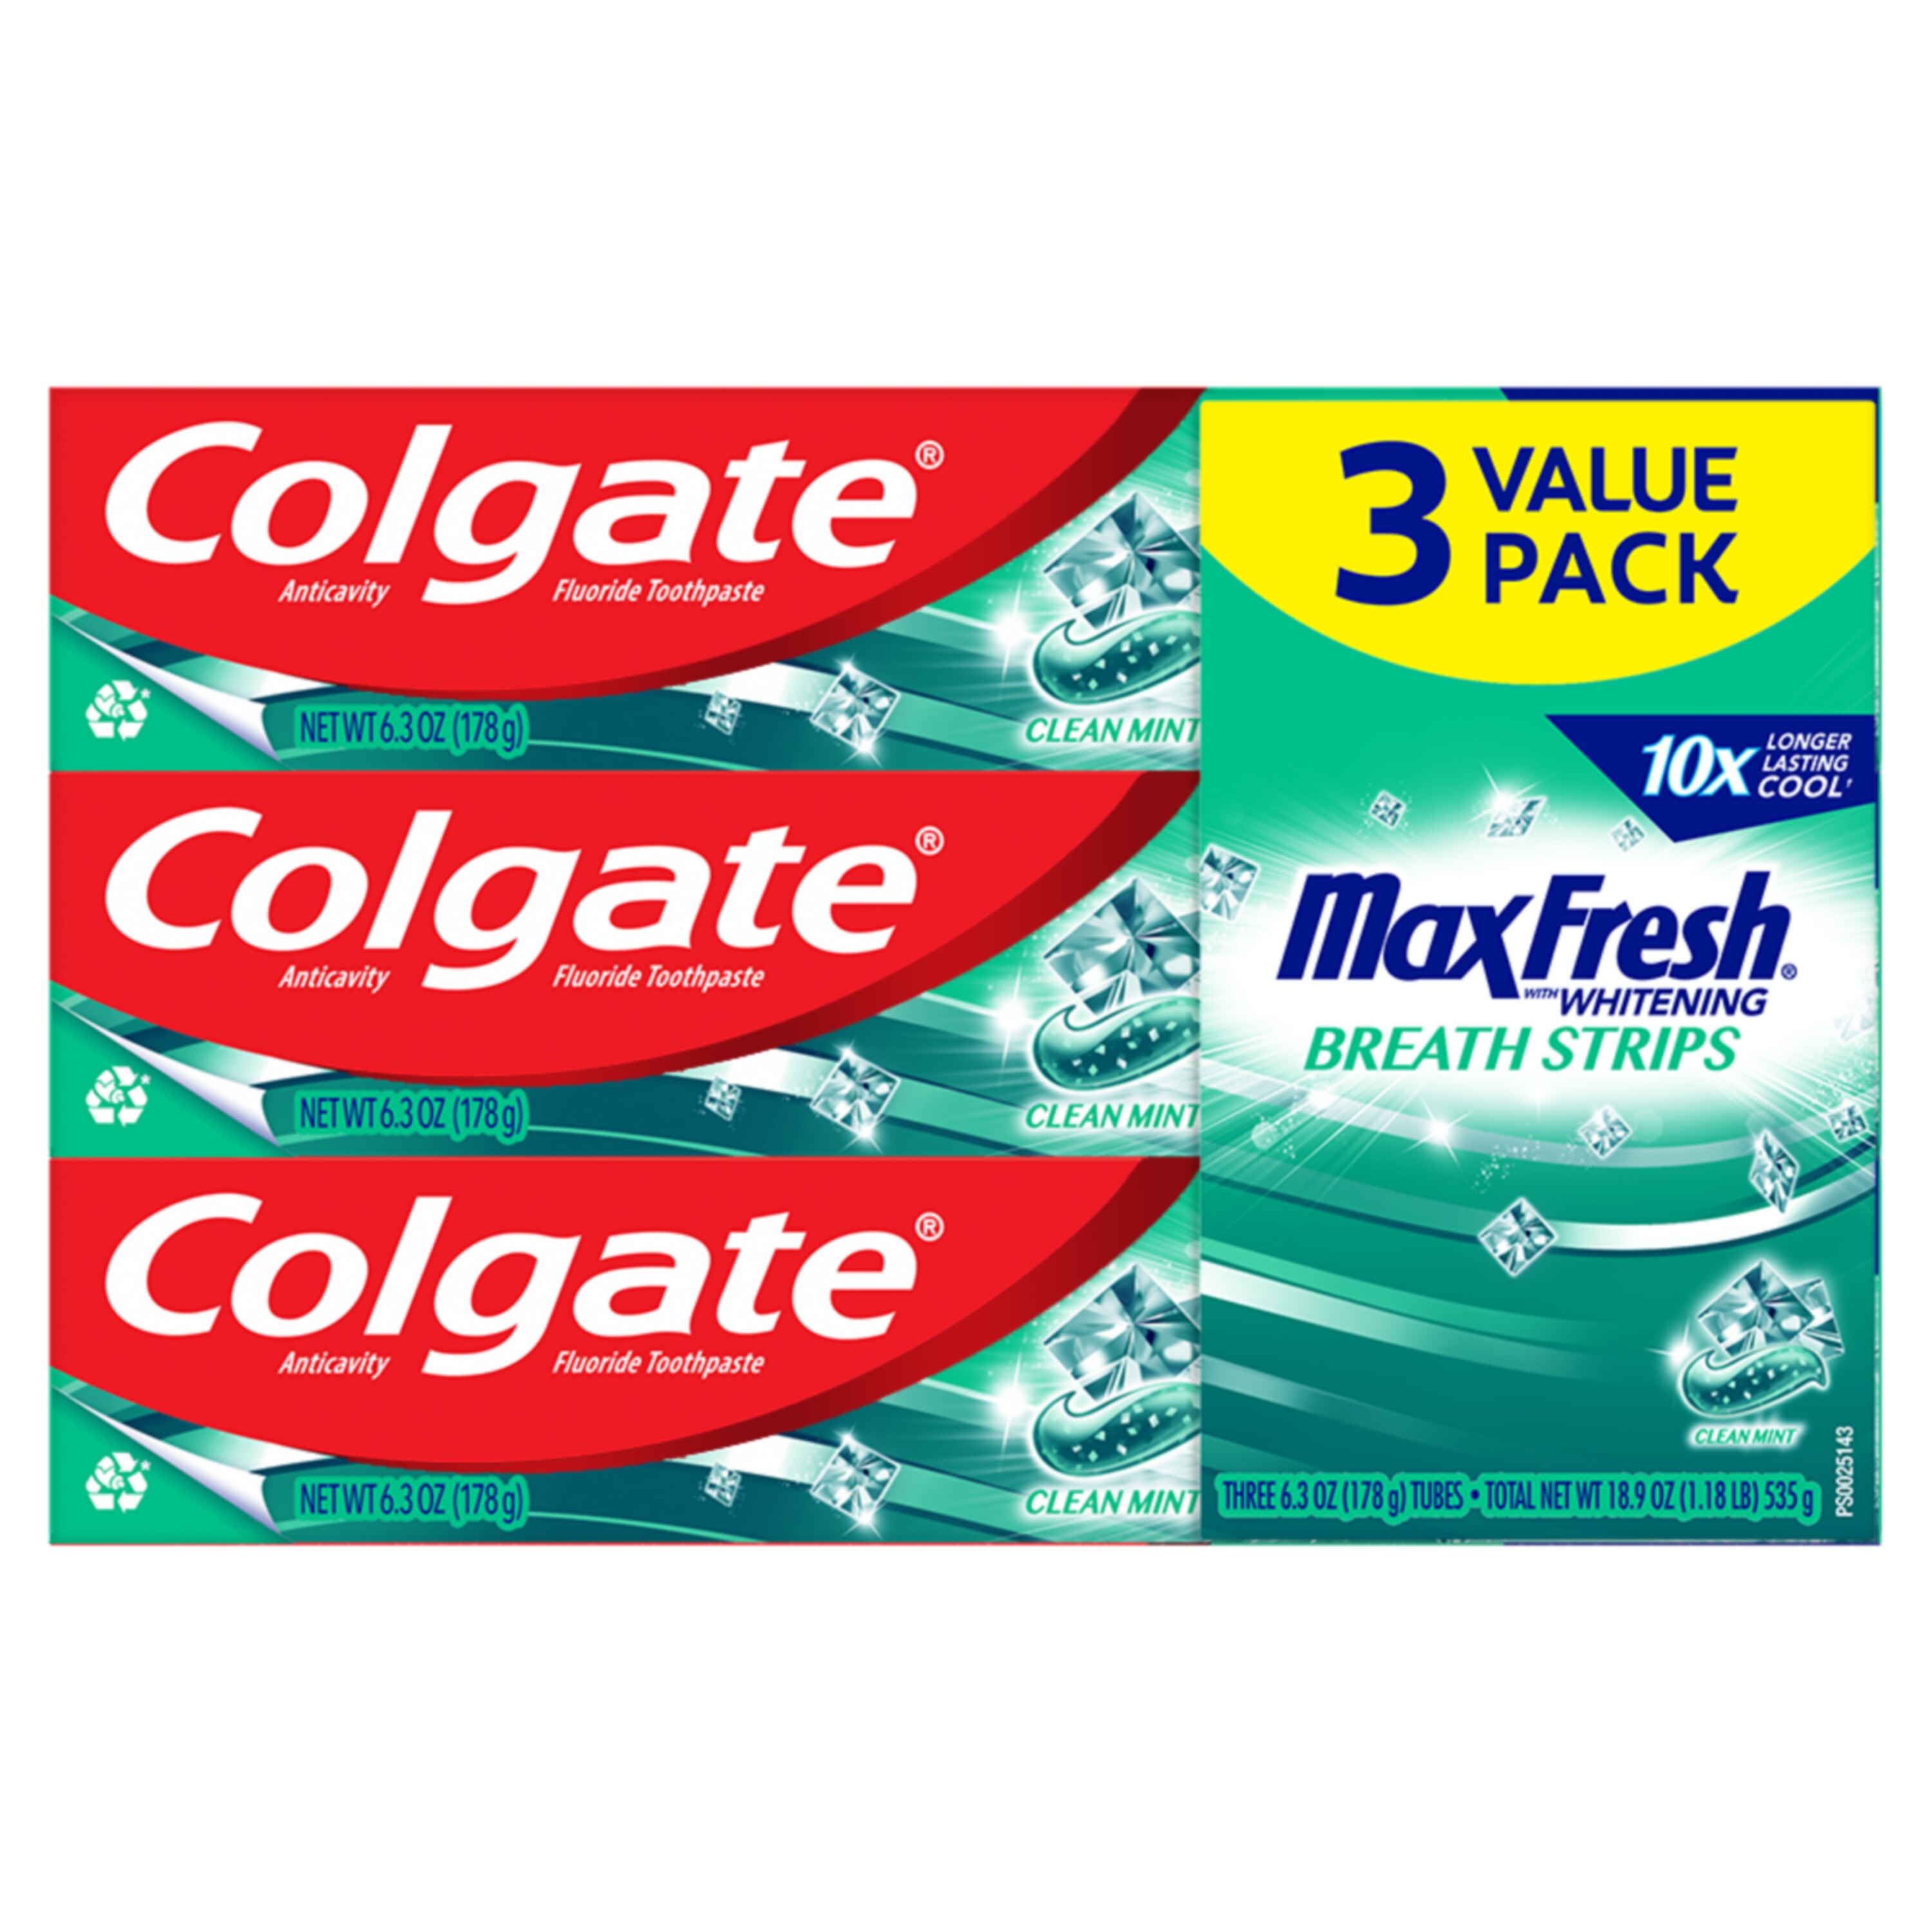 Colgate Max Fresh Whitening Anticavity Fluoride Toothpaste With Breath Strips, Clean Mint, 6.3 OZ, Three Pack , CVS